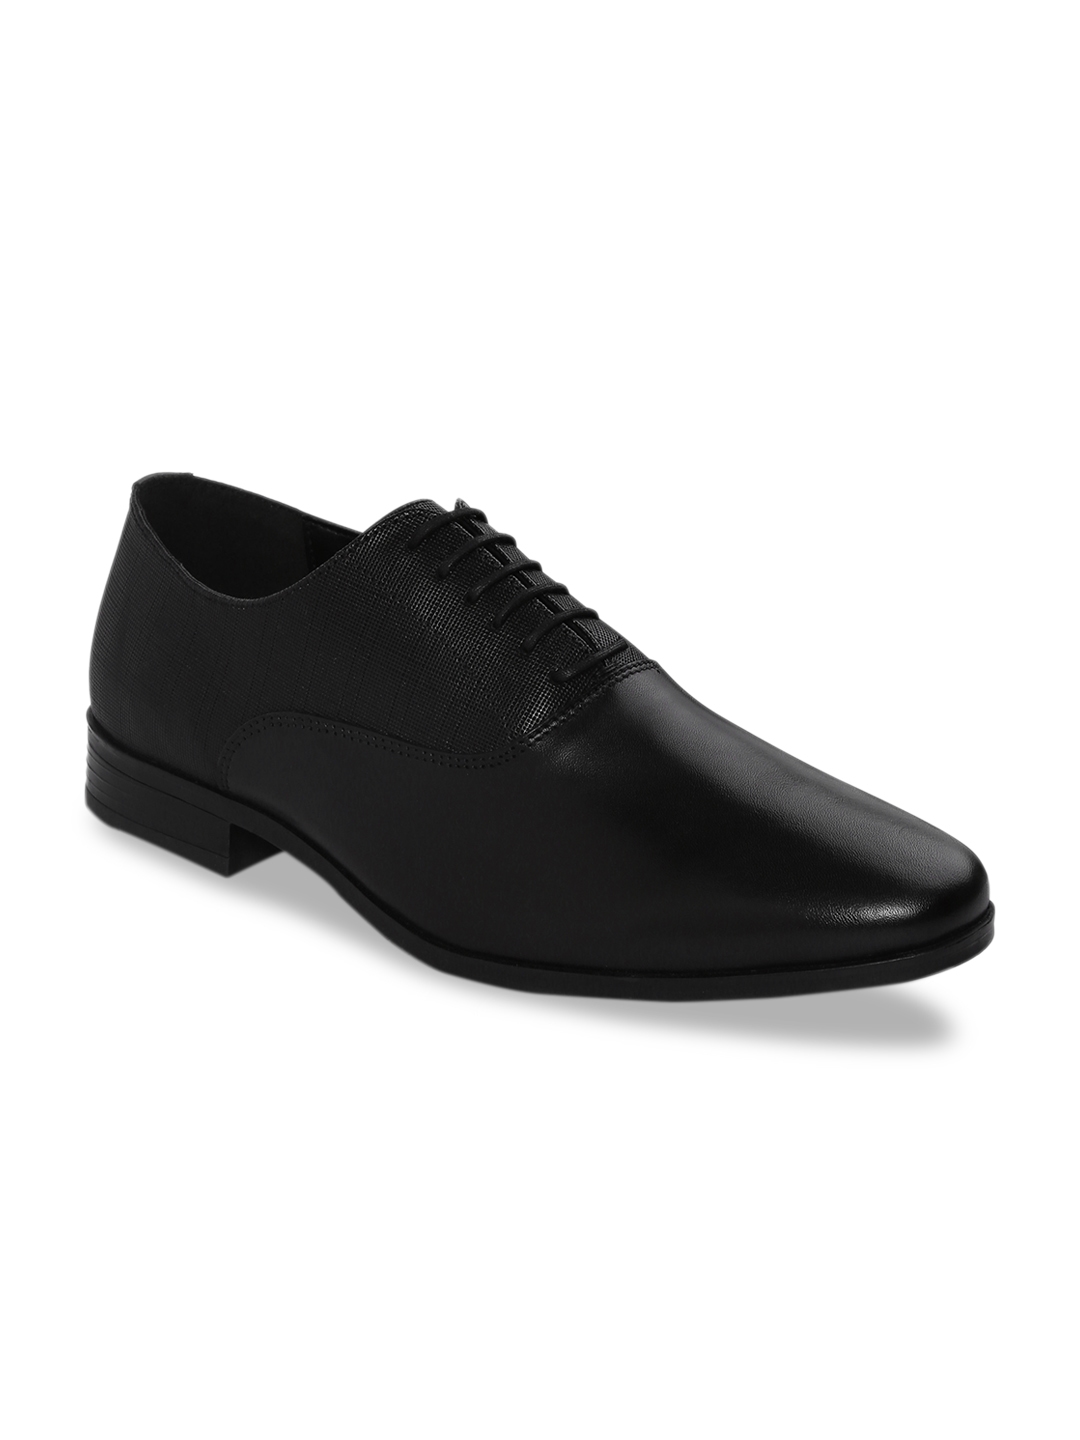 red tape black shoes formal